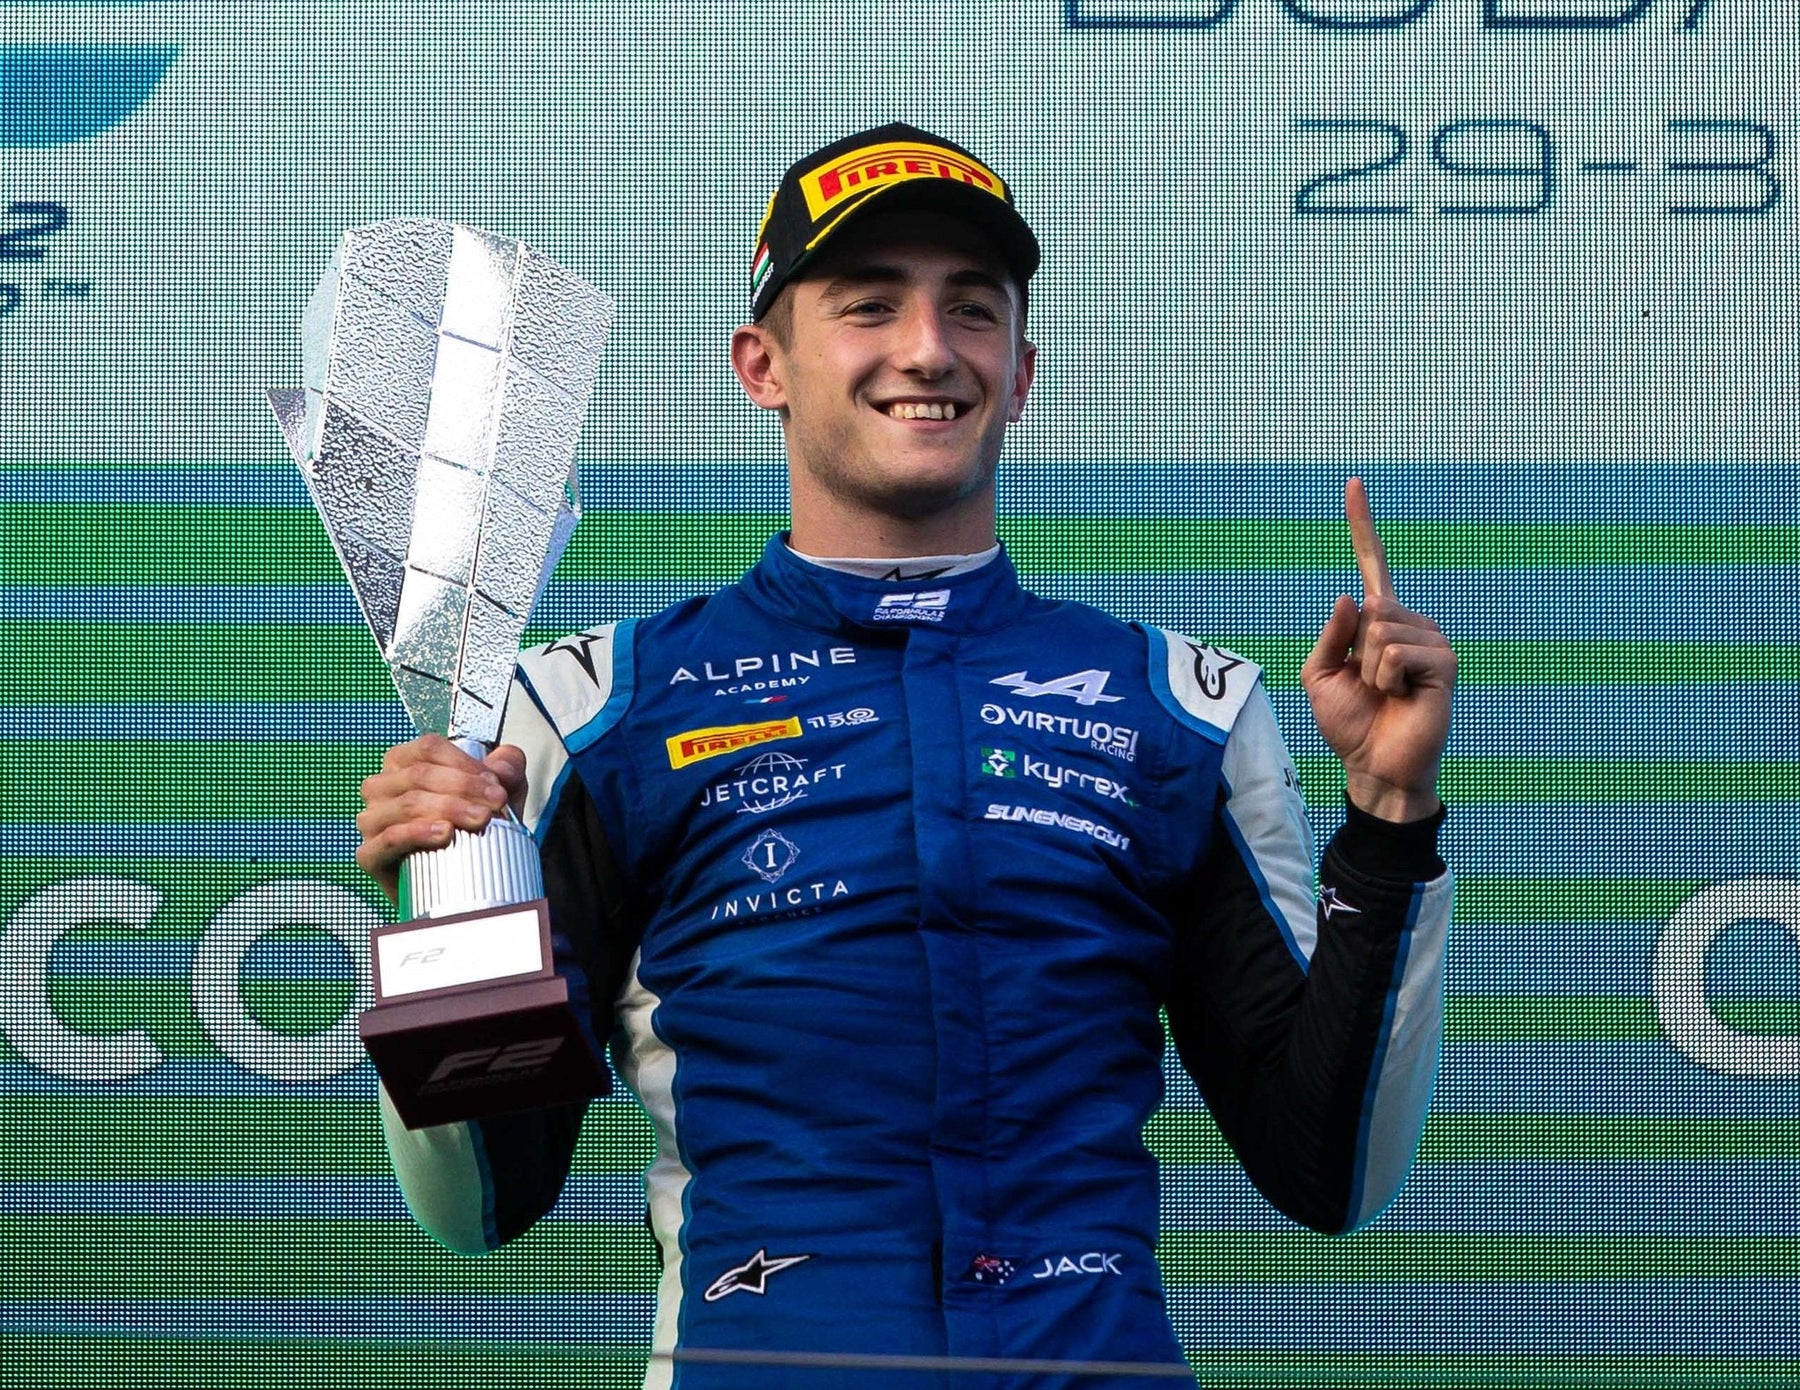 ALPINESTARS SCORE F2 DOUBLE-WIN IN BUDAPEST WITH JACK DOOHAN VICTORIOUS IN THE SPRINT RACE AND THEO POURCHAIRE THE FEATURE RACE WINNER IN HUNGARY